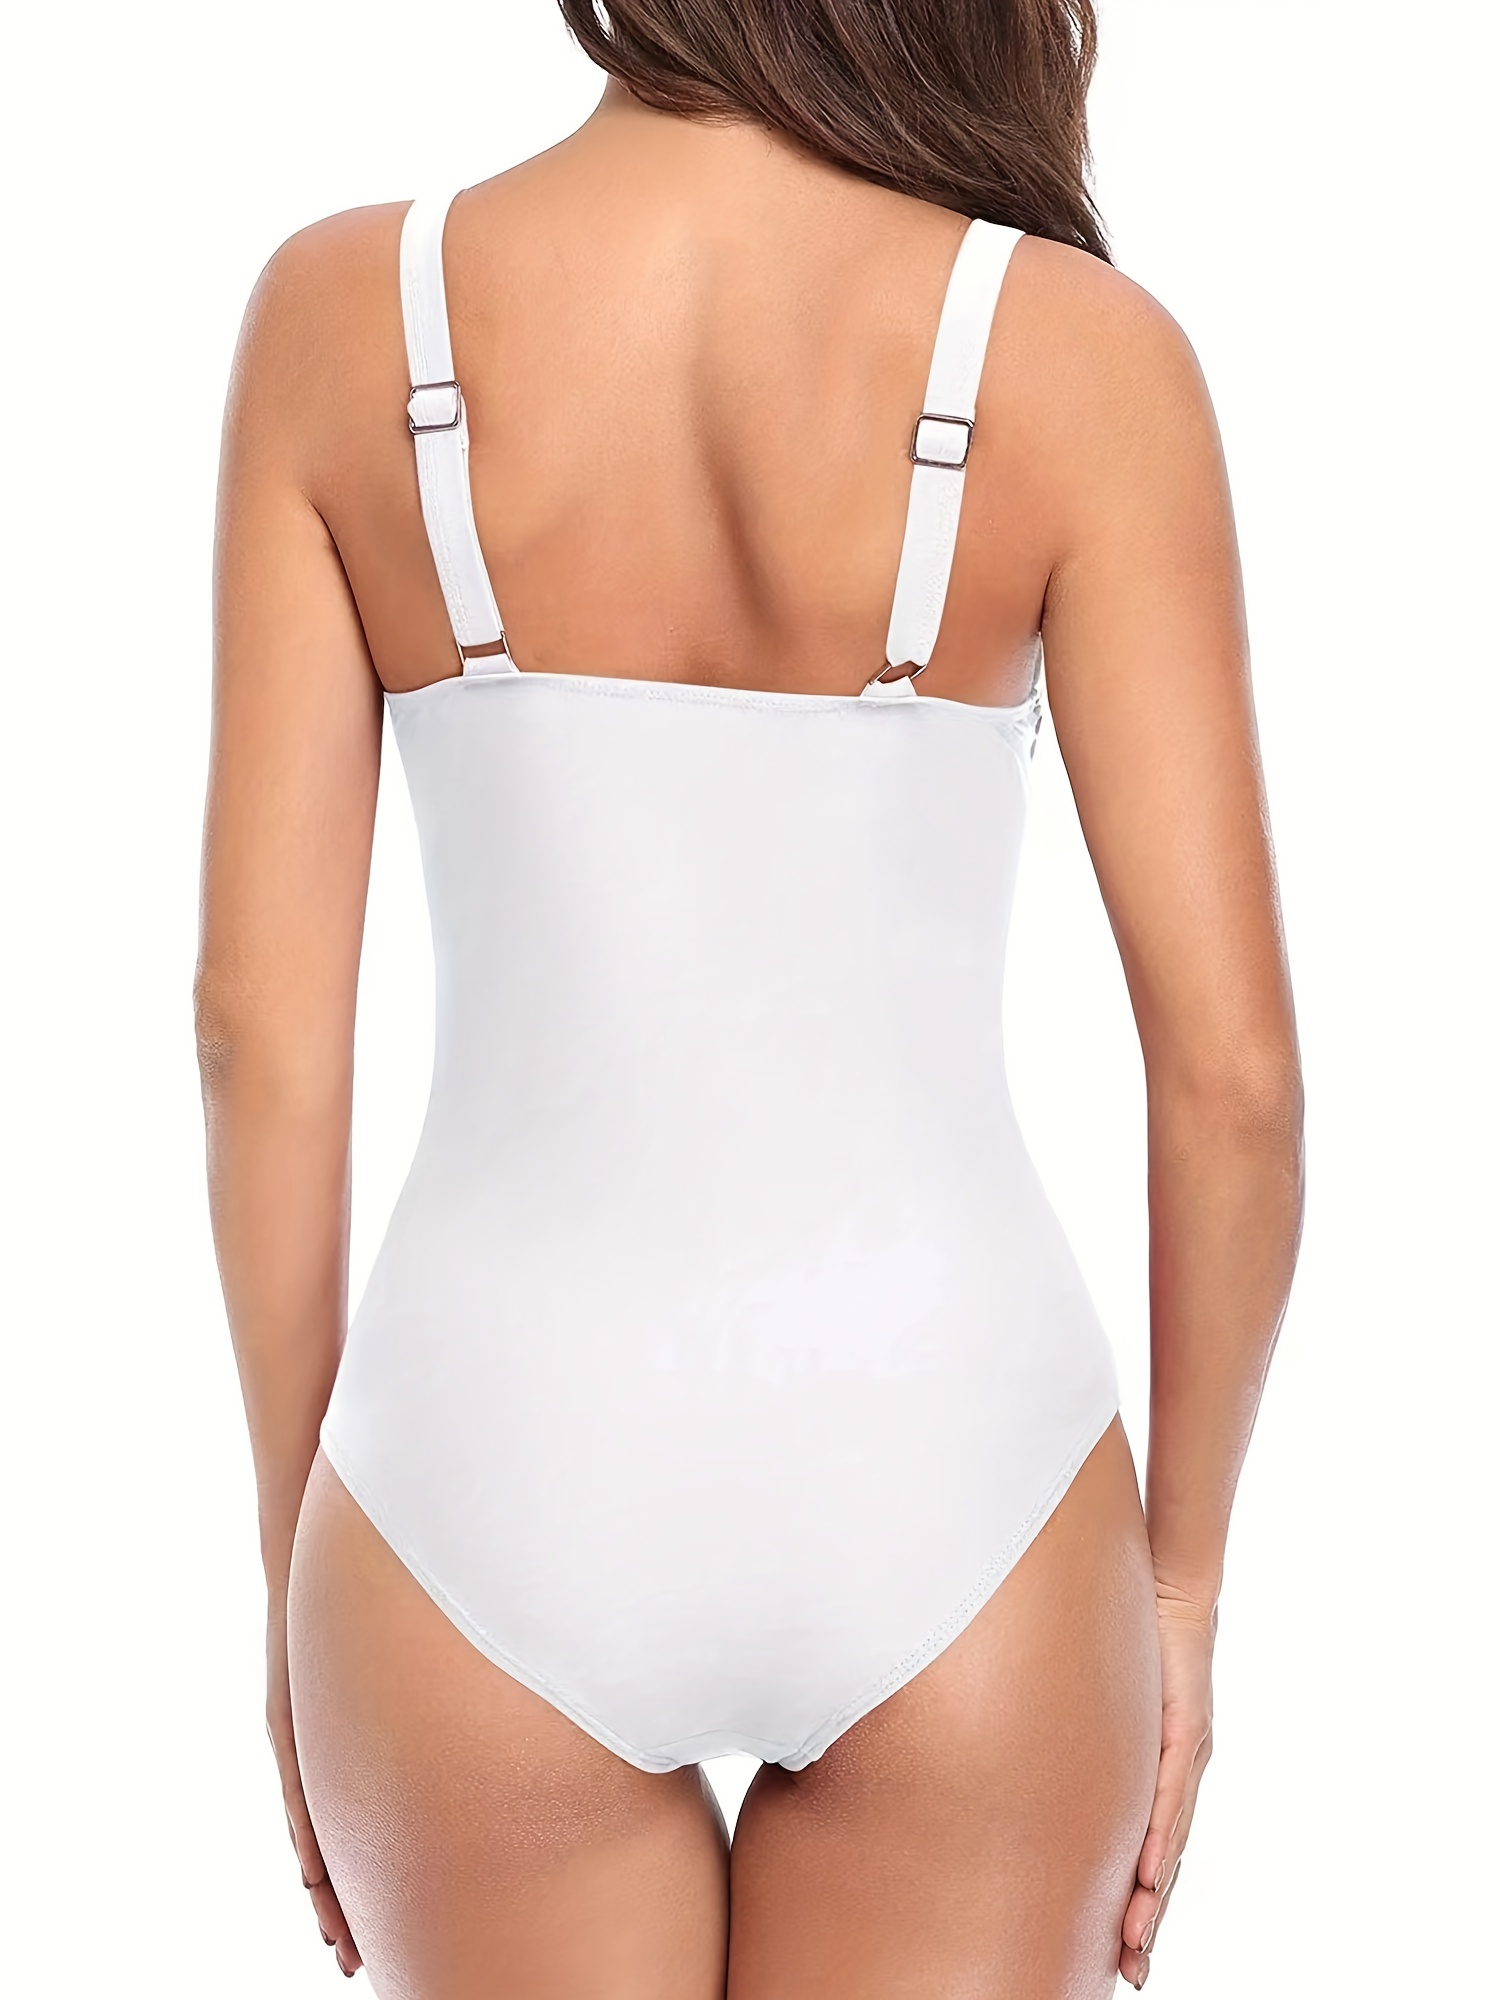 Womens Slimming Bathing Suits